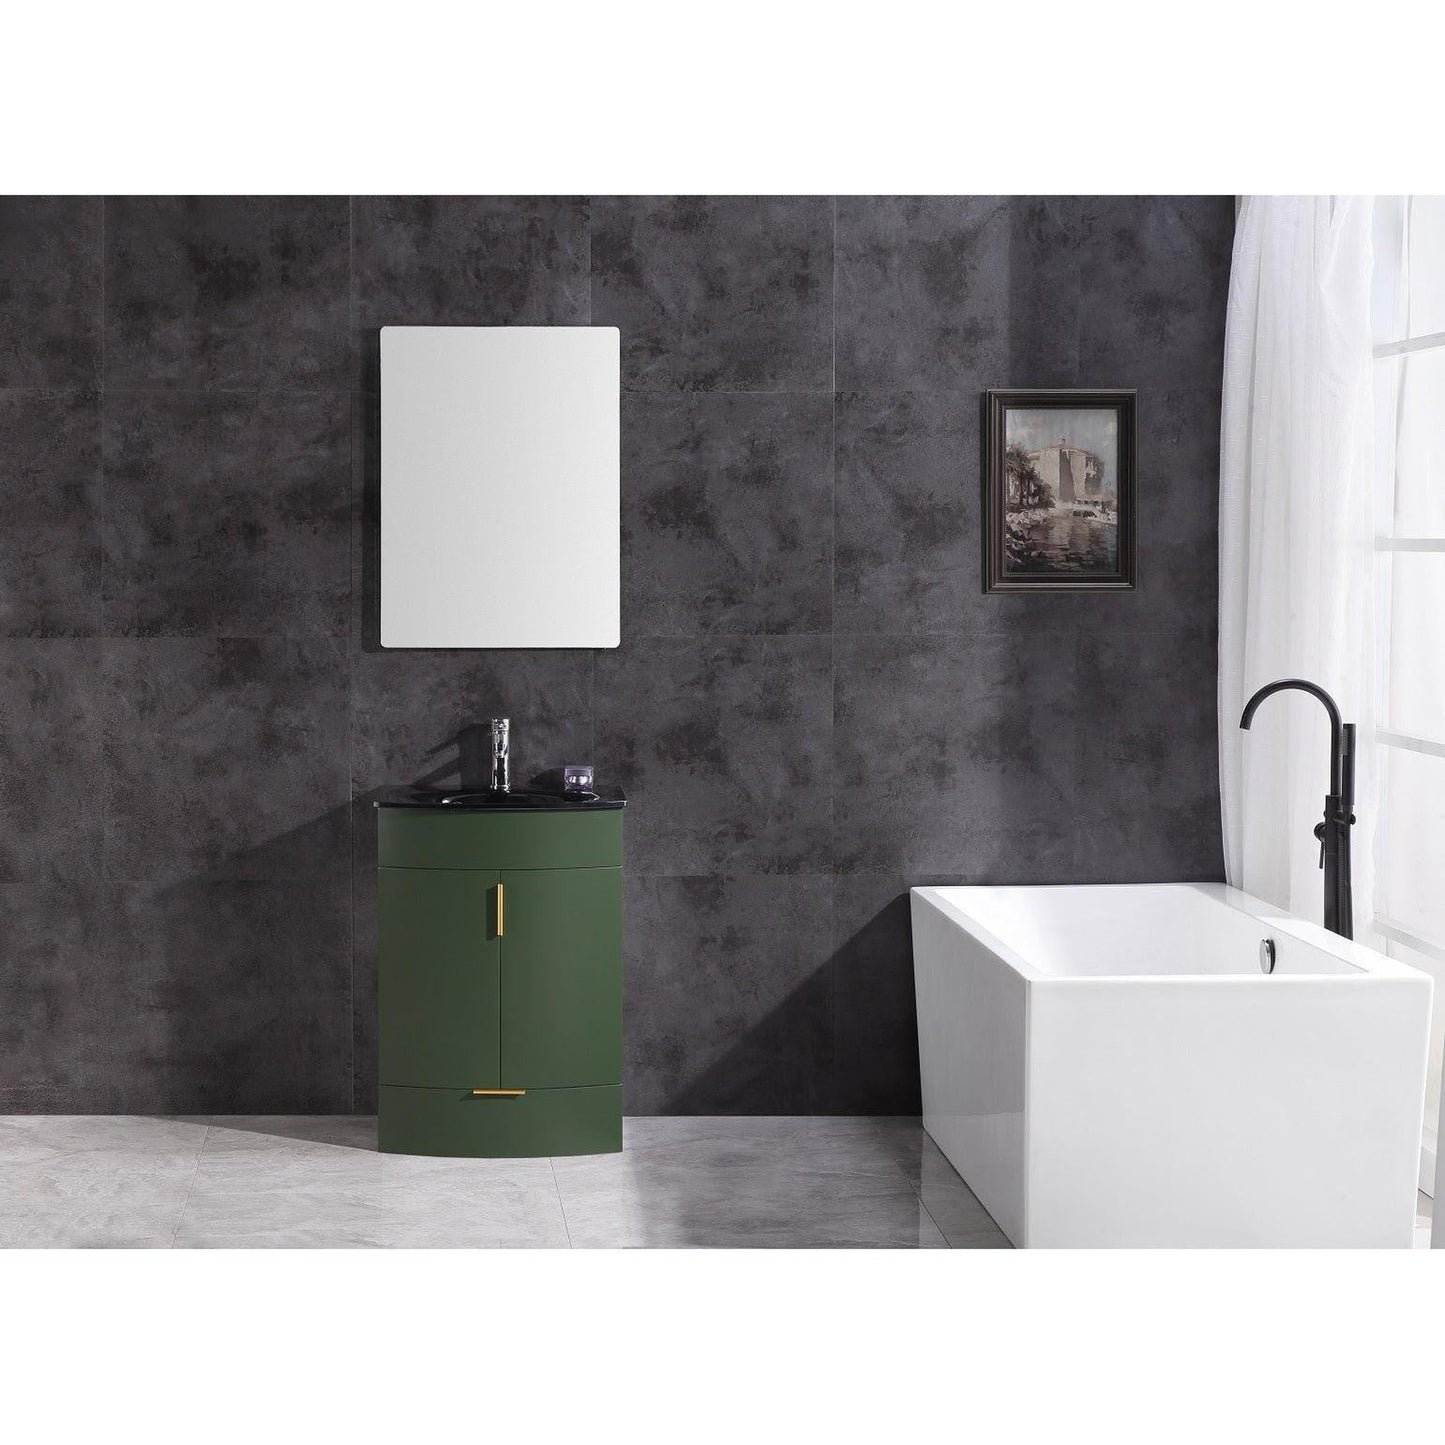 Legion Furniture WTM8130 24" Vogue Green Freestanding PVC Vanity Cabinet With Tempered Glass Top and Sink